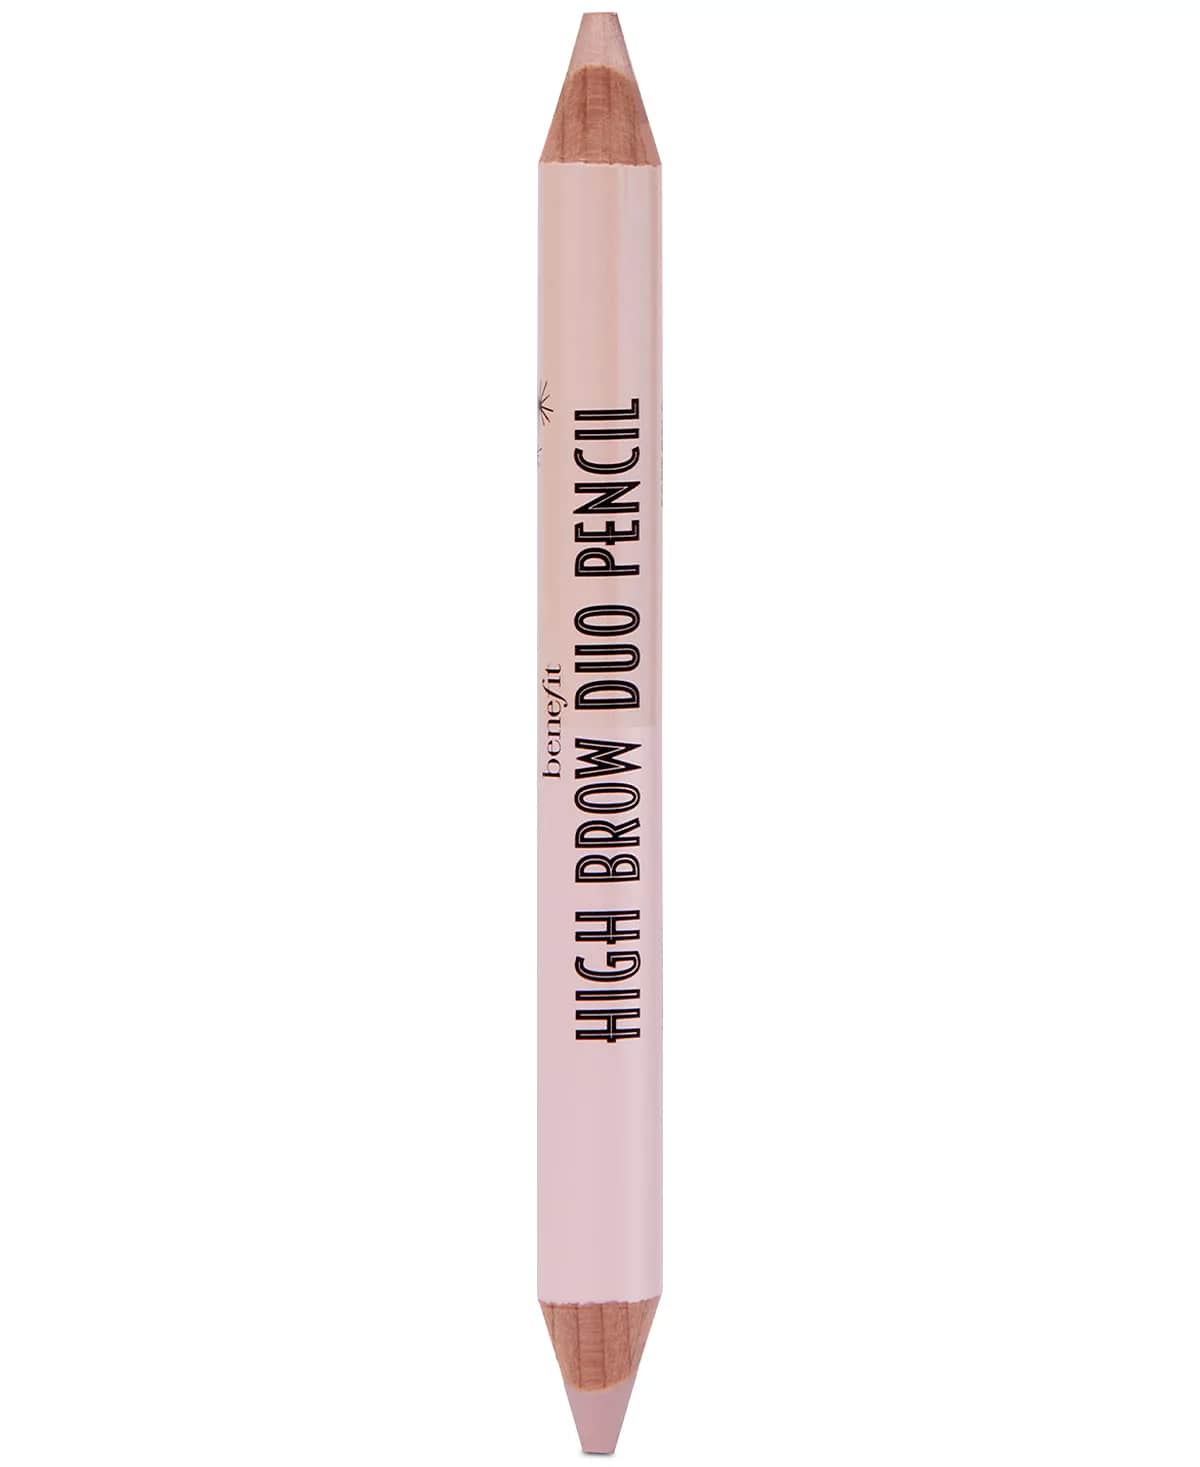 High Brow Duo Pencil by Benefit Cosmetics - Miazone